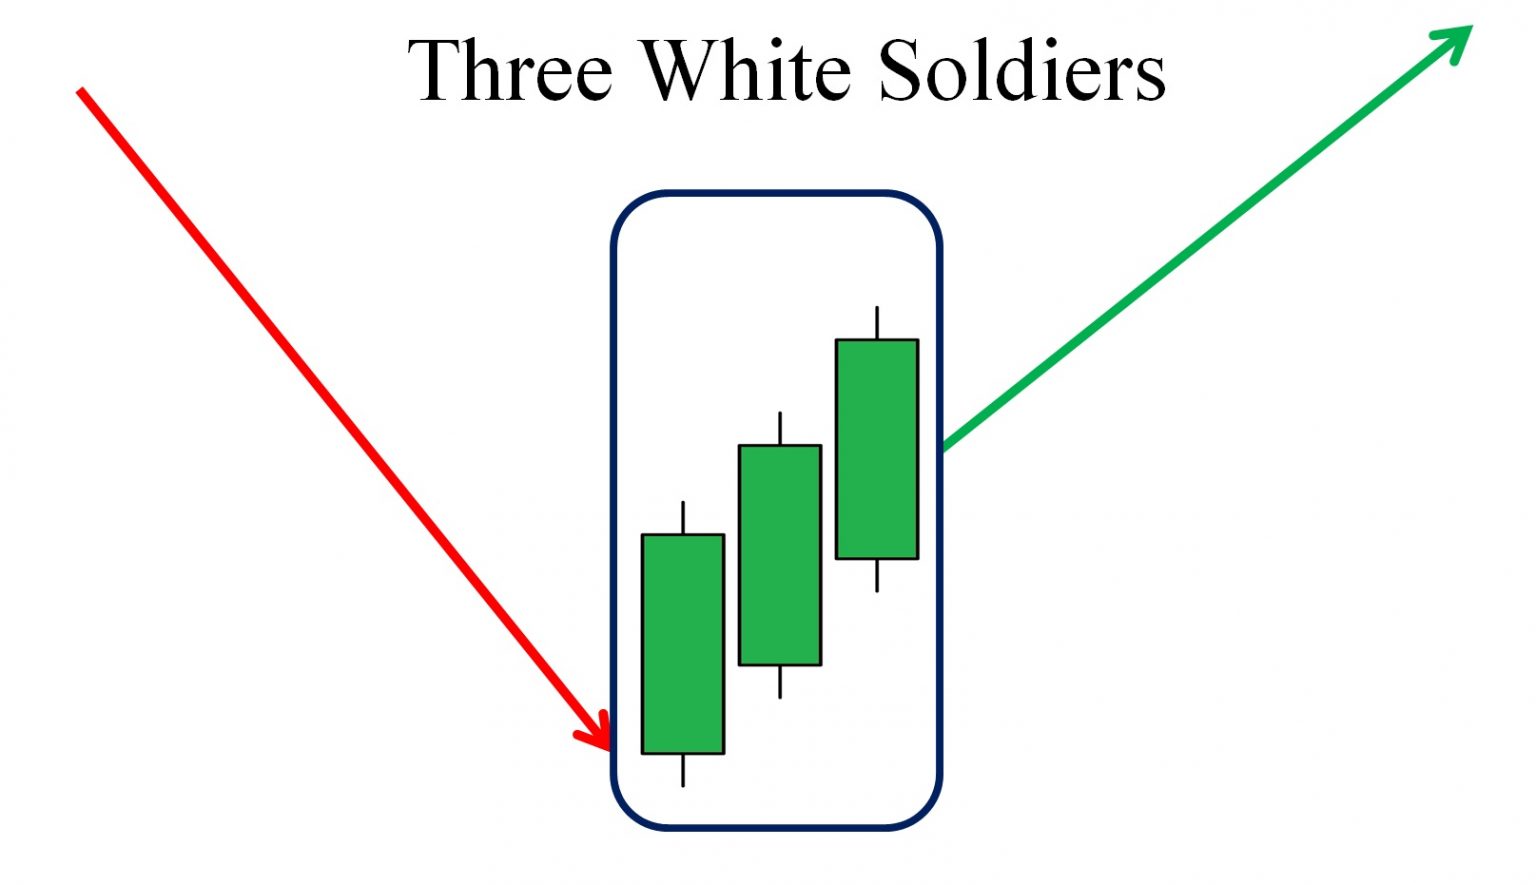 What is the Three White Soldiers candlestick pattern in Forex?